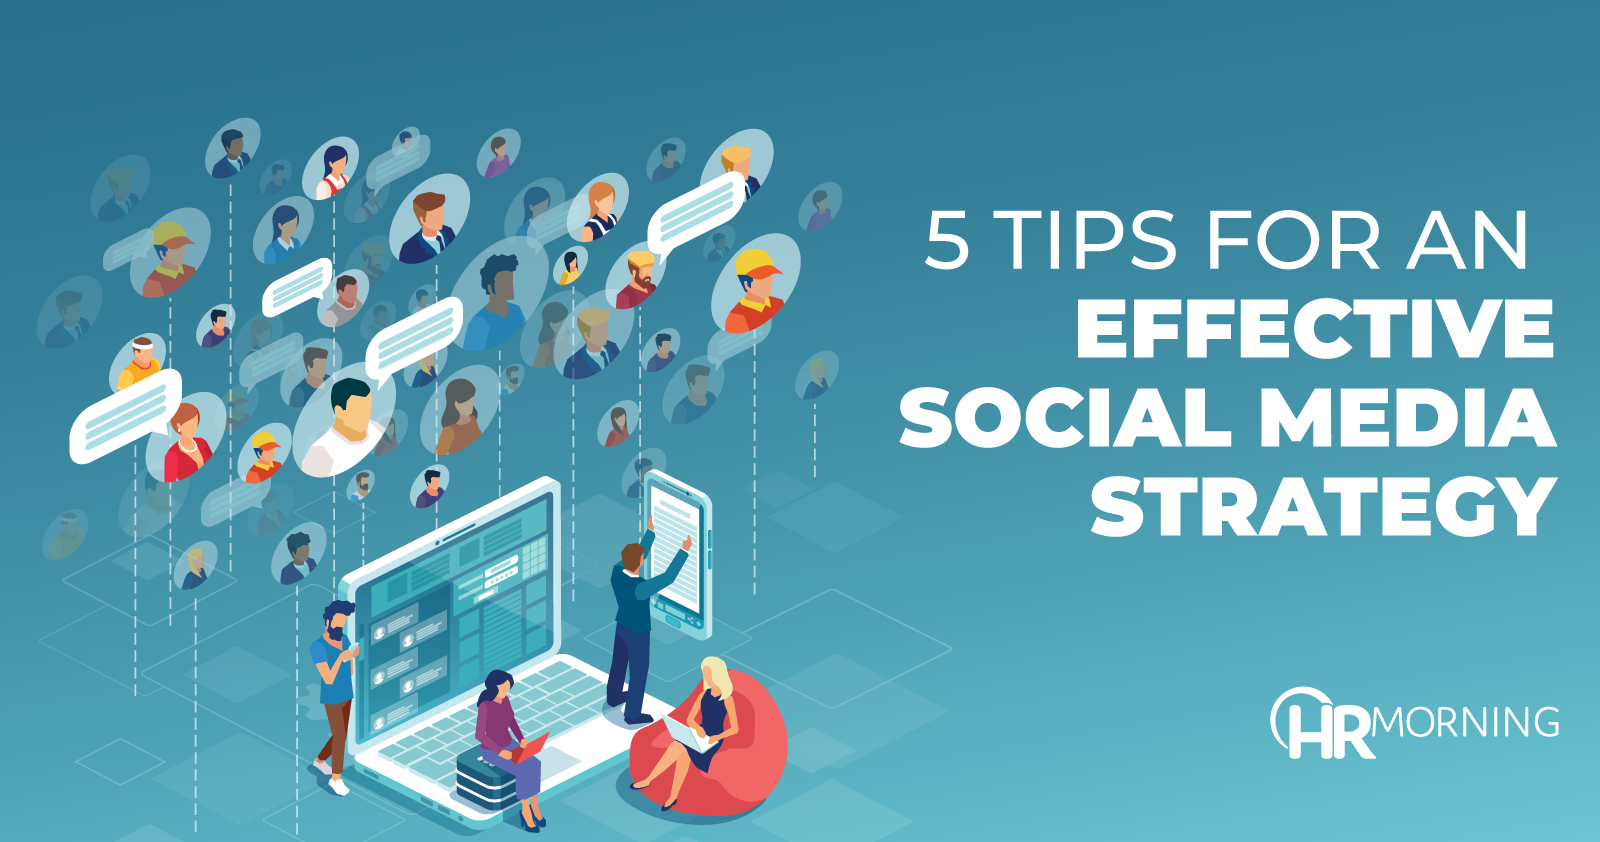 5 tips for an effective social media strategy